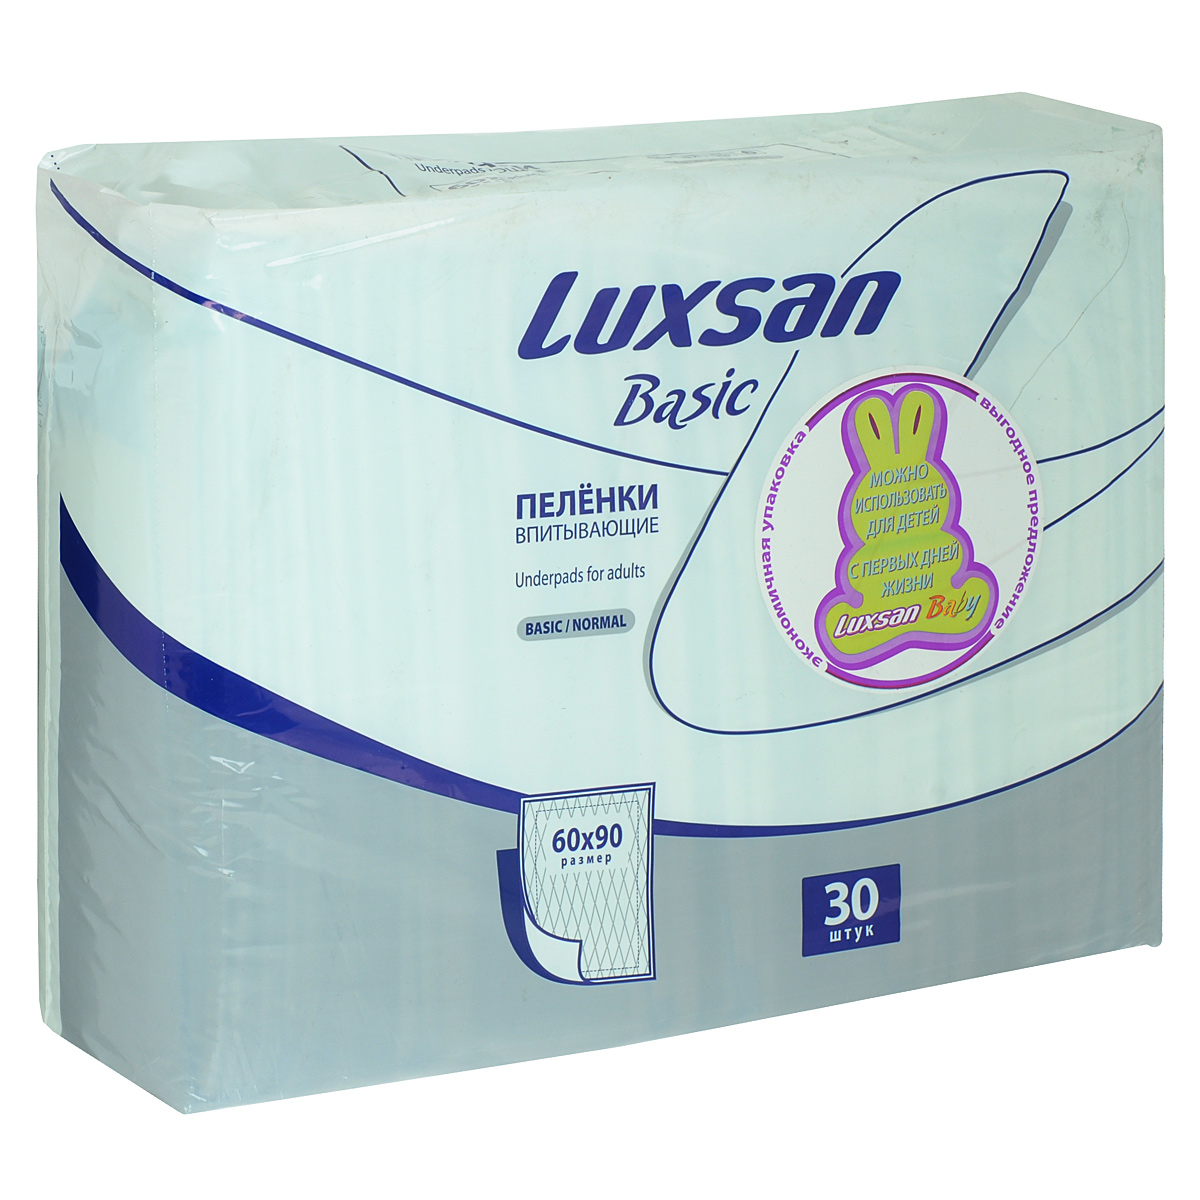   Luxsan Baby Basic/Normal, ,  , 60   90 , 30  - Luxsan1.69.030.1  Luxsan Baby Basic/Normal    ,       . ,   ,      ,            .   ()     .       .         .